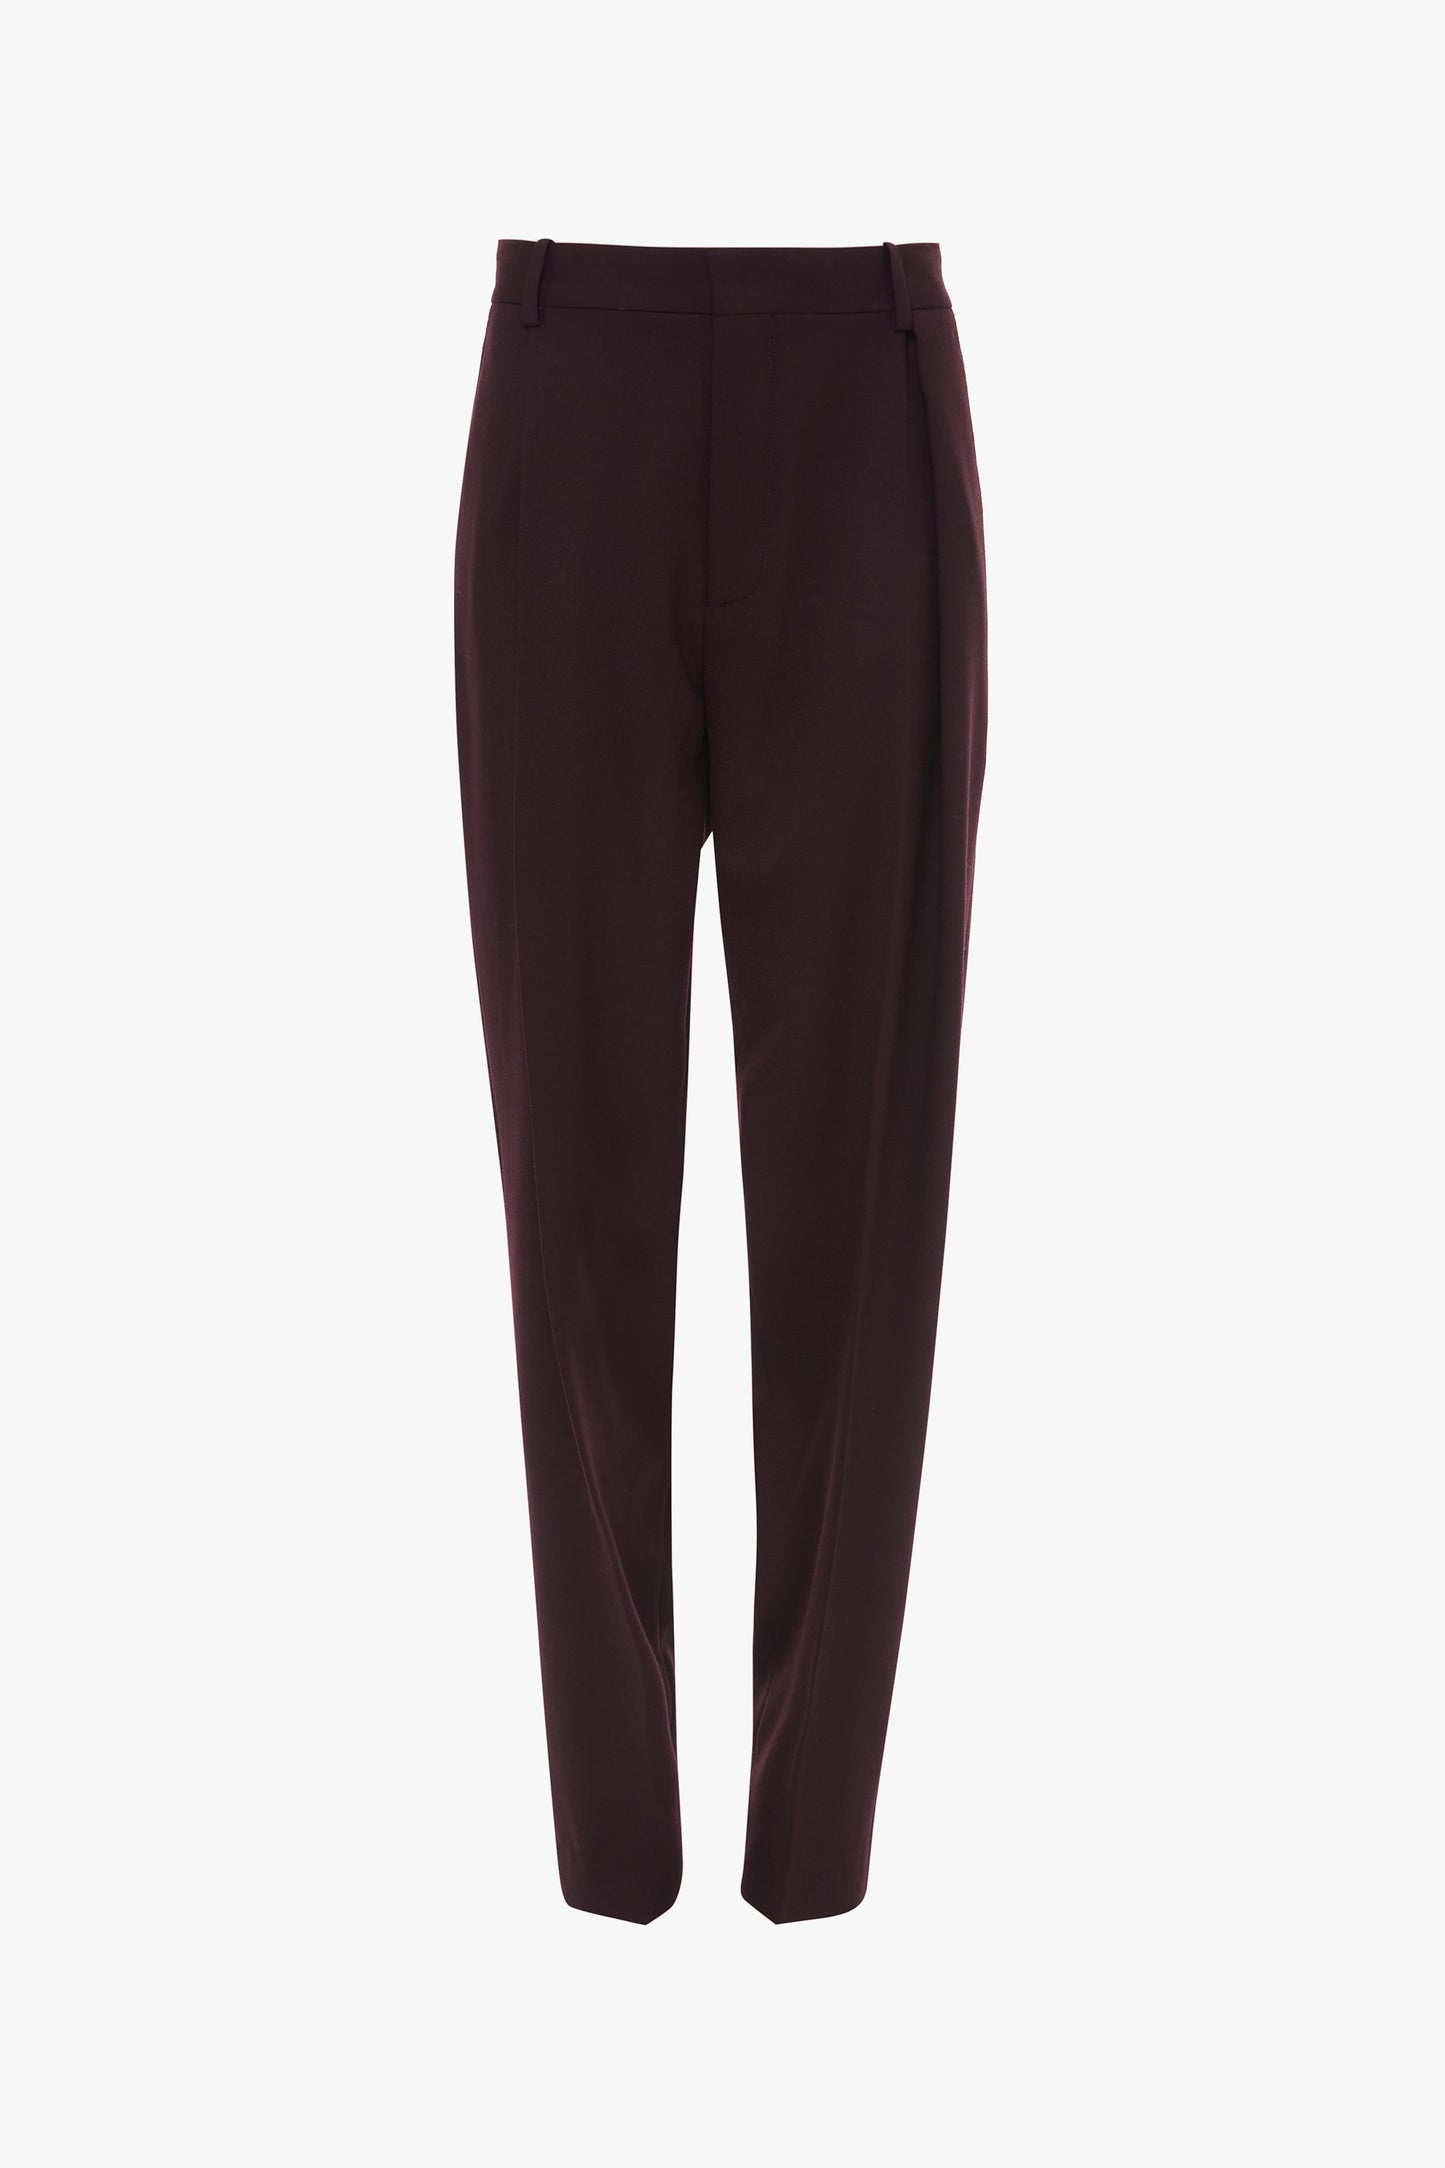 A pair of Victoria Beckham Asymmetric Chino Trouser In Deep Mahogany with a straight-leg fit, belt loops, and front pleats, displayed against a white background.